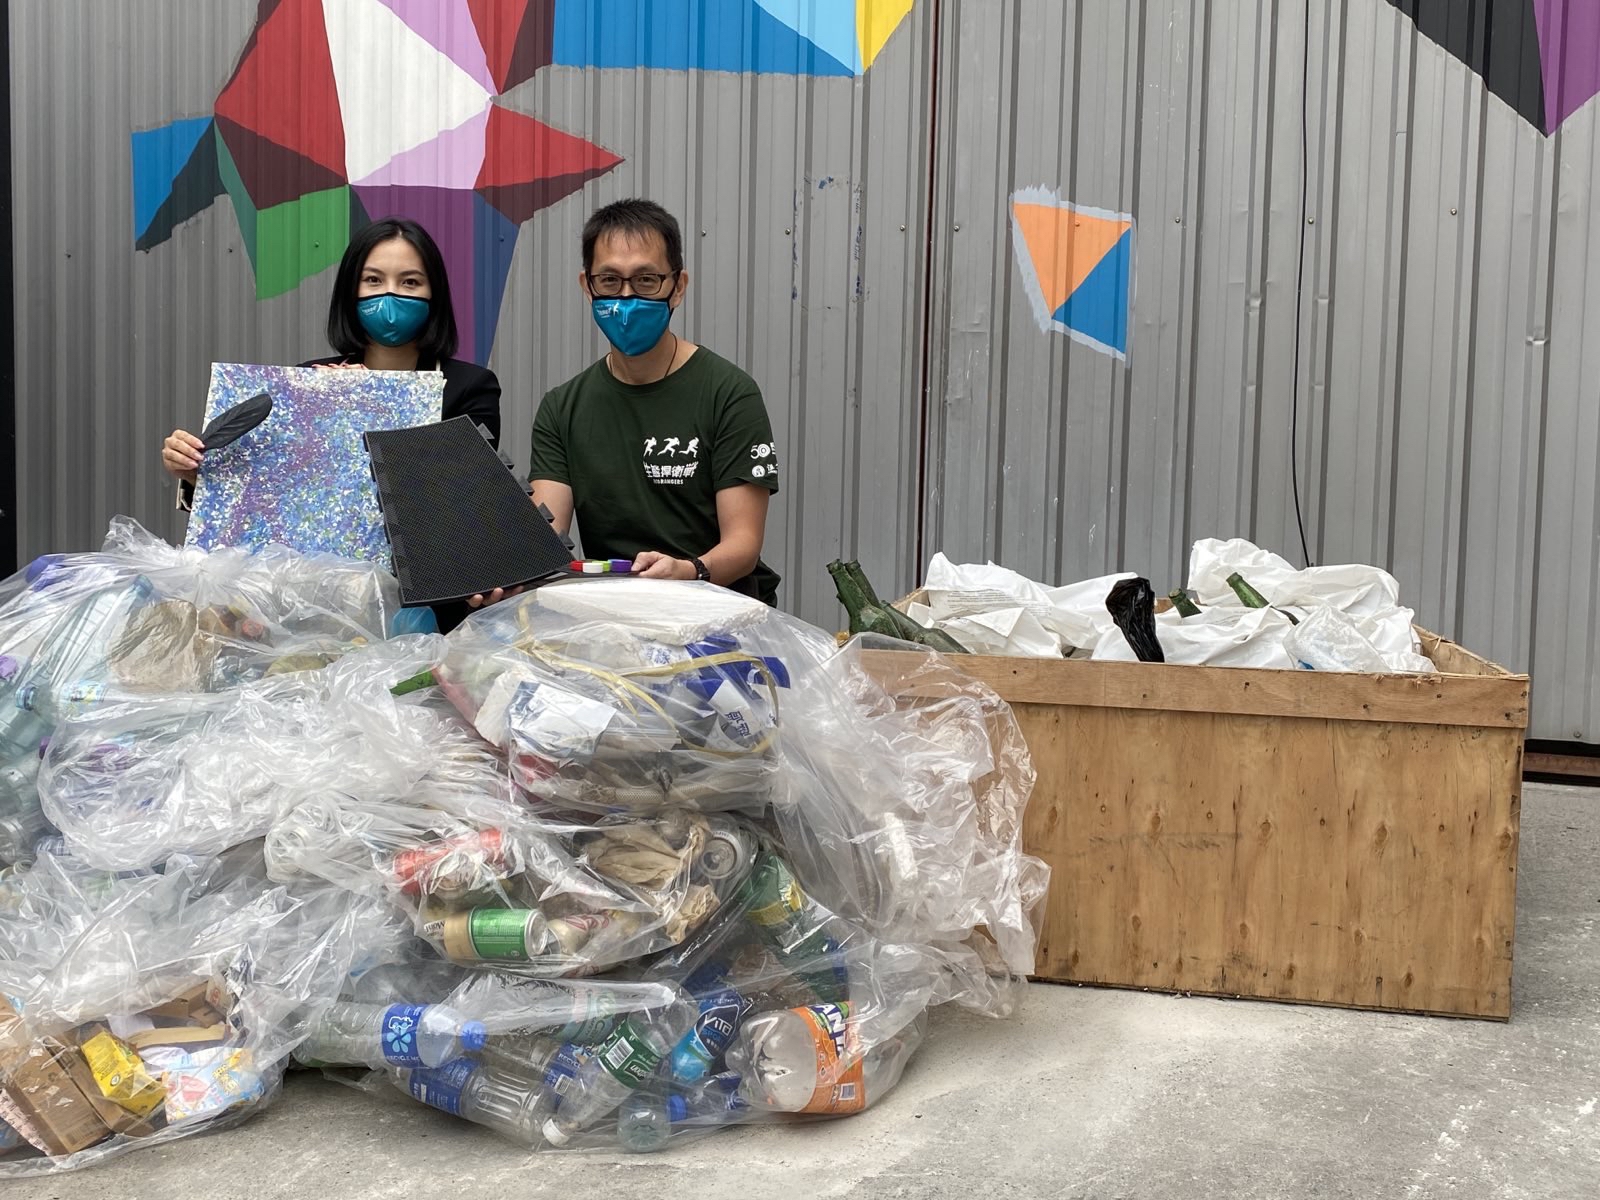 Eco-Rangers collaborated with Seal Eco Advance Limited, a local recycling factory, and its recycling network to collect recyclables and recycle them into useful and sustainable raw materials and products.